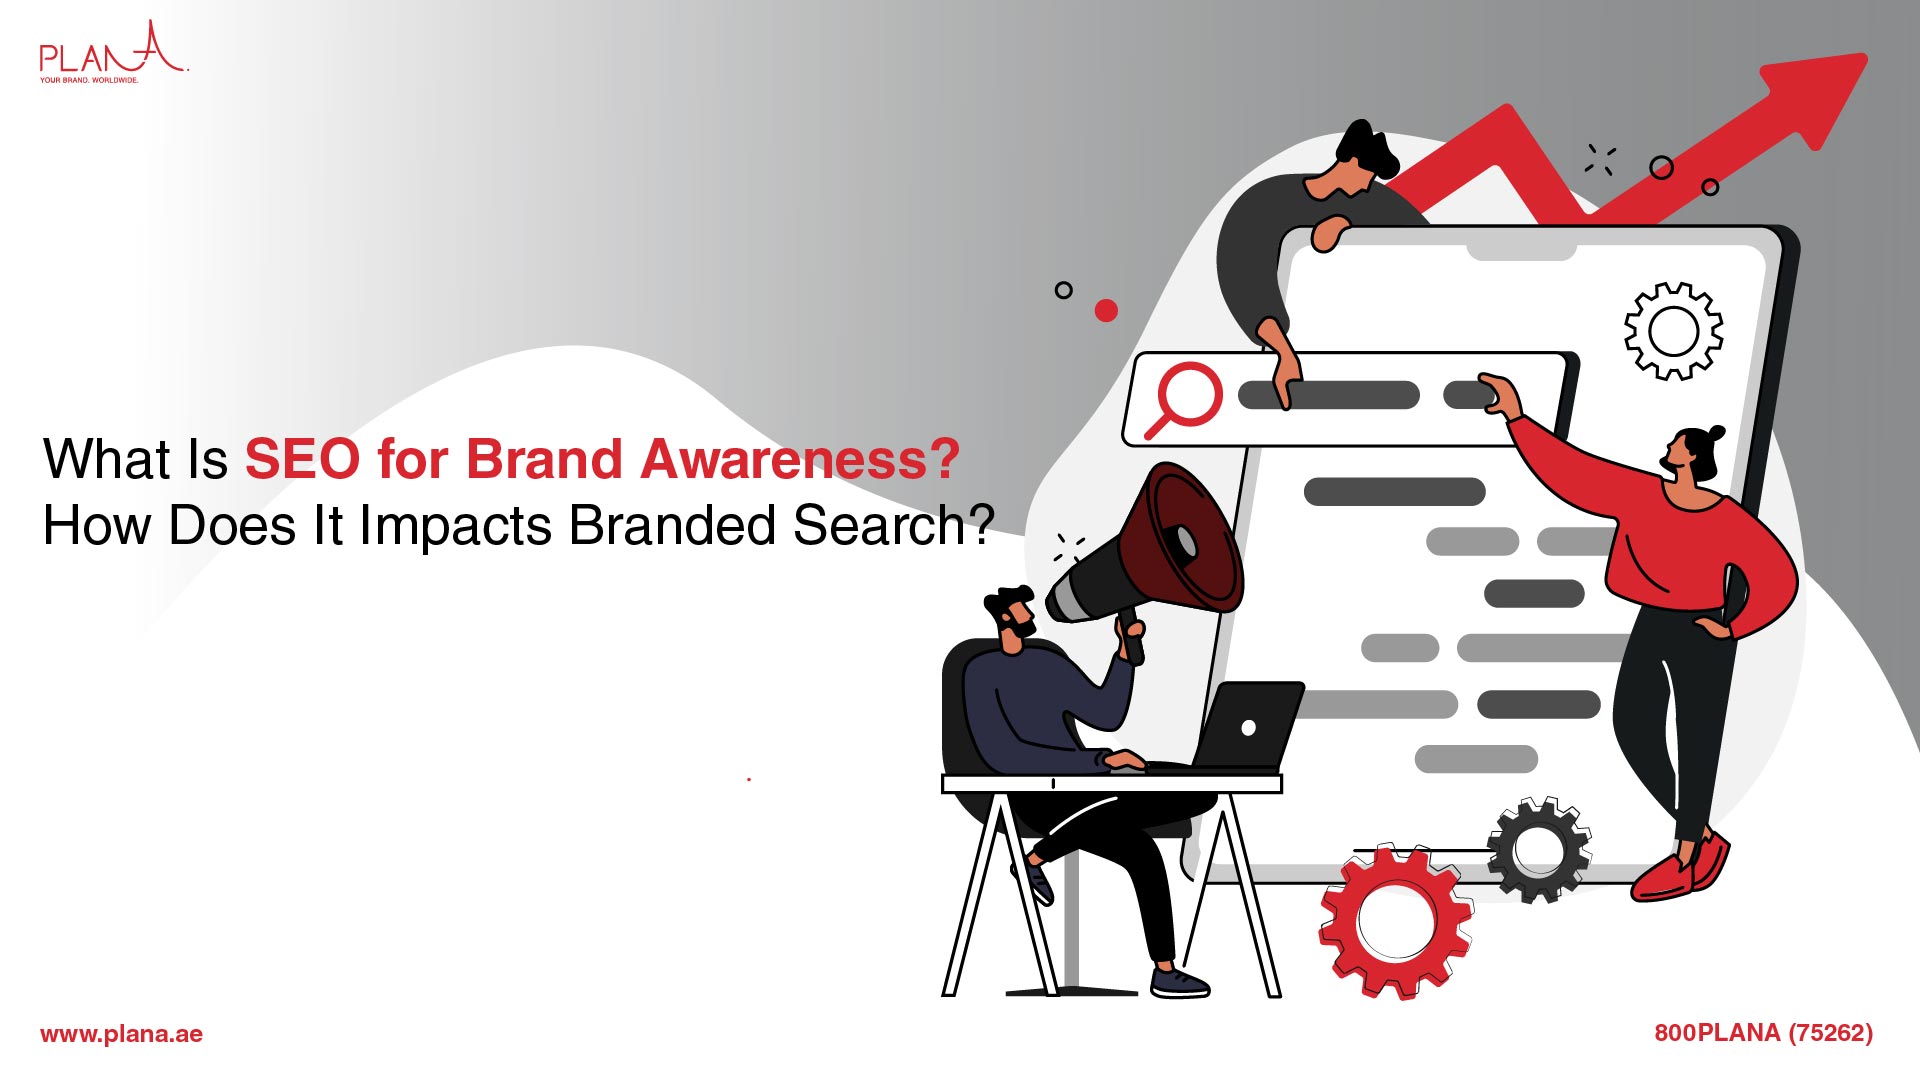 What is SEO for Brand Awareness? How Does it Impact Branded Search?